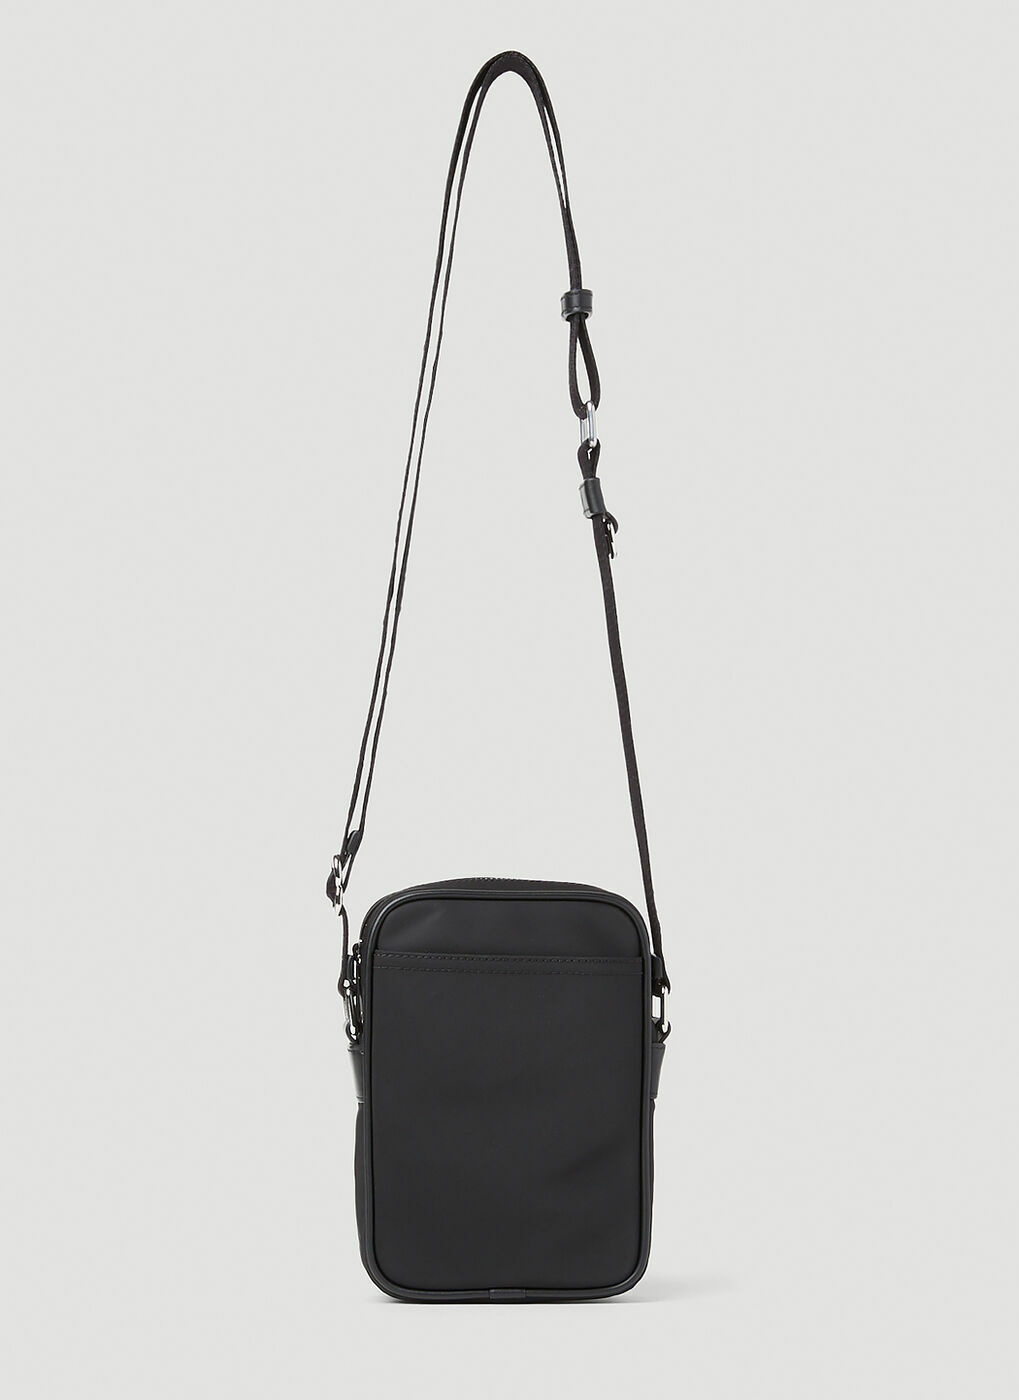 Burberry - Paddy Phone Shoulder Bag in Black Burberry